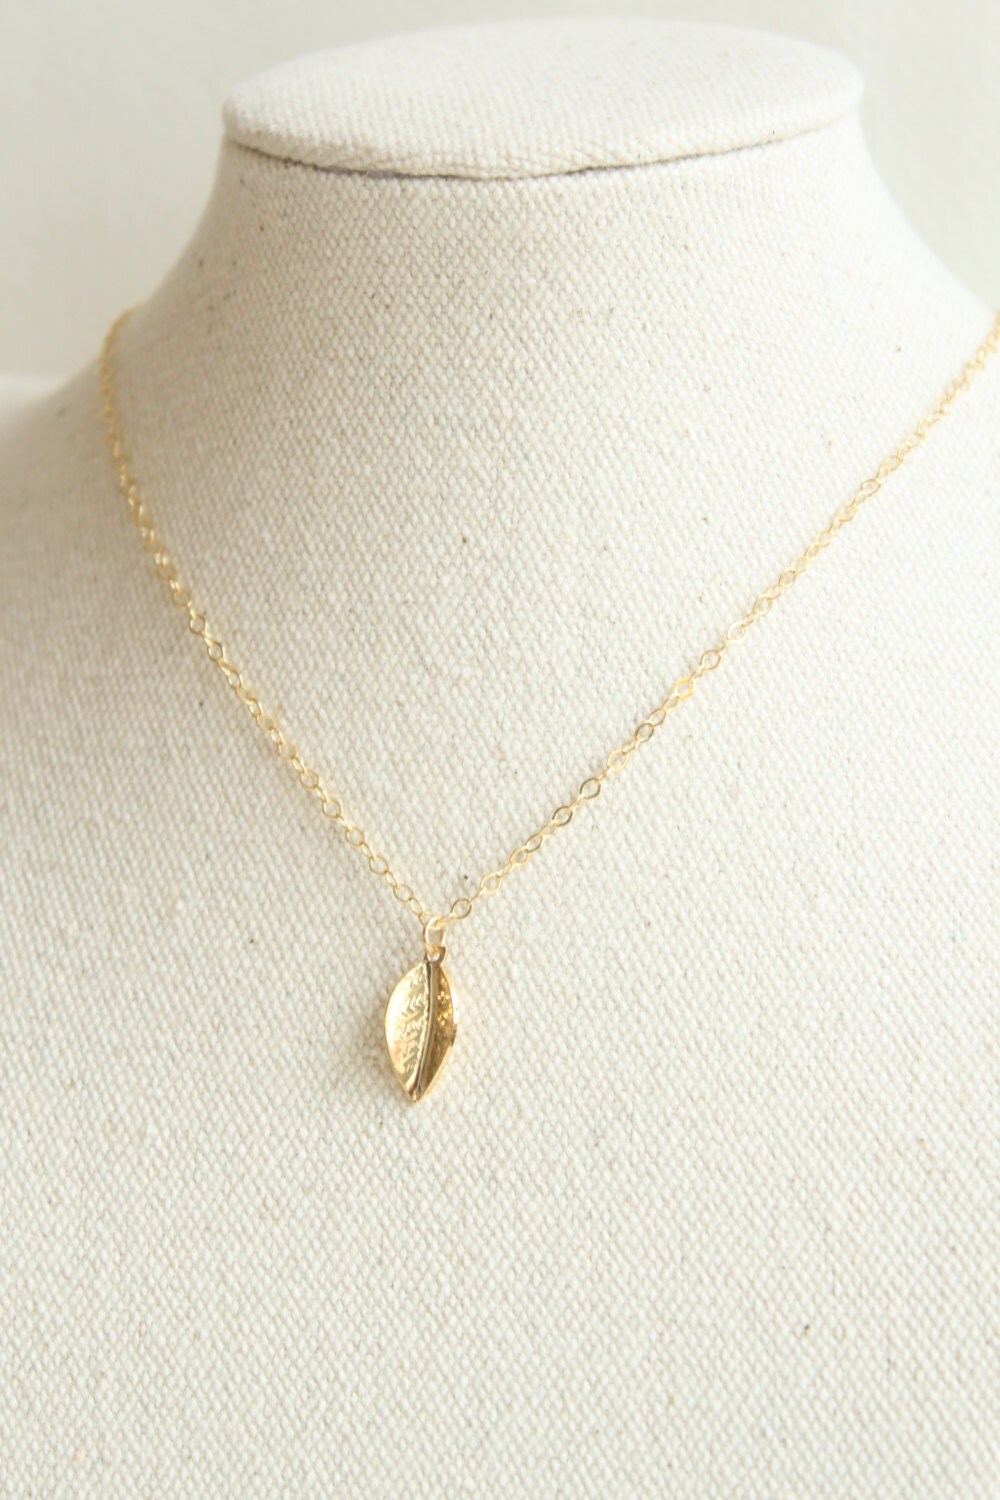 Tiny Gold Leaf Everyday Necklace with free gift box solitaire